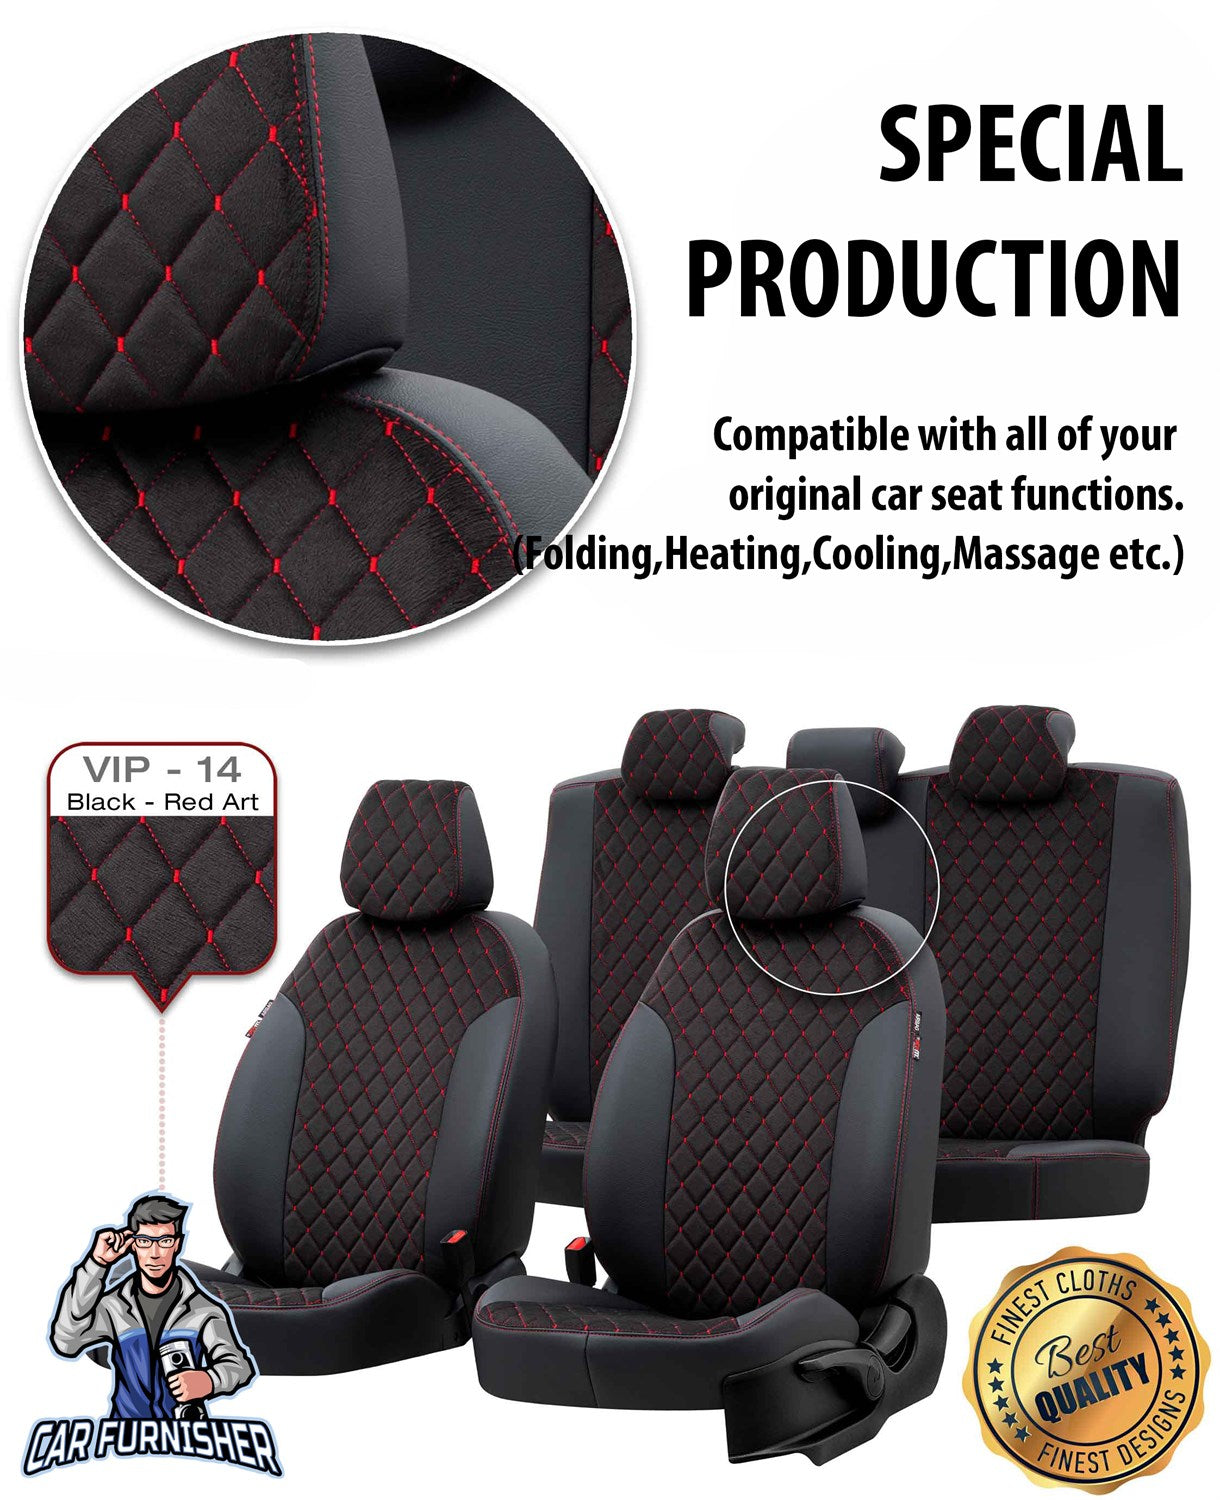 Landrover Freelander Car Seat Covers 1998-2012 Madrid Feather Smoked Leather & Foal Feather